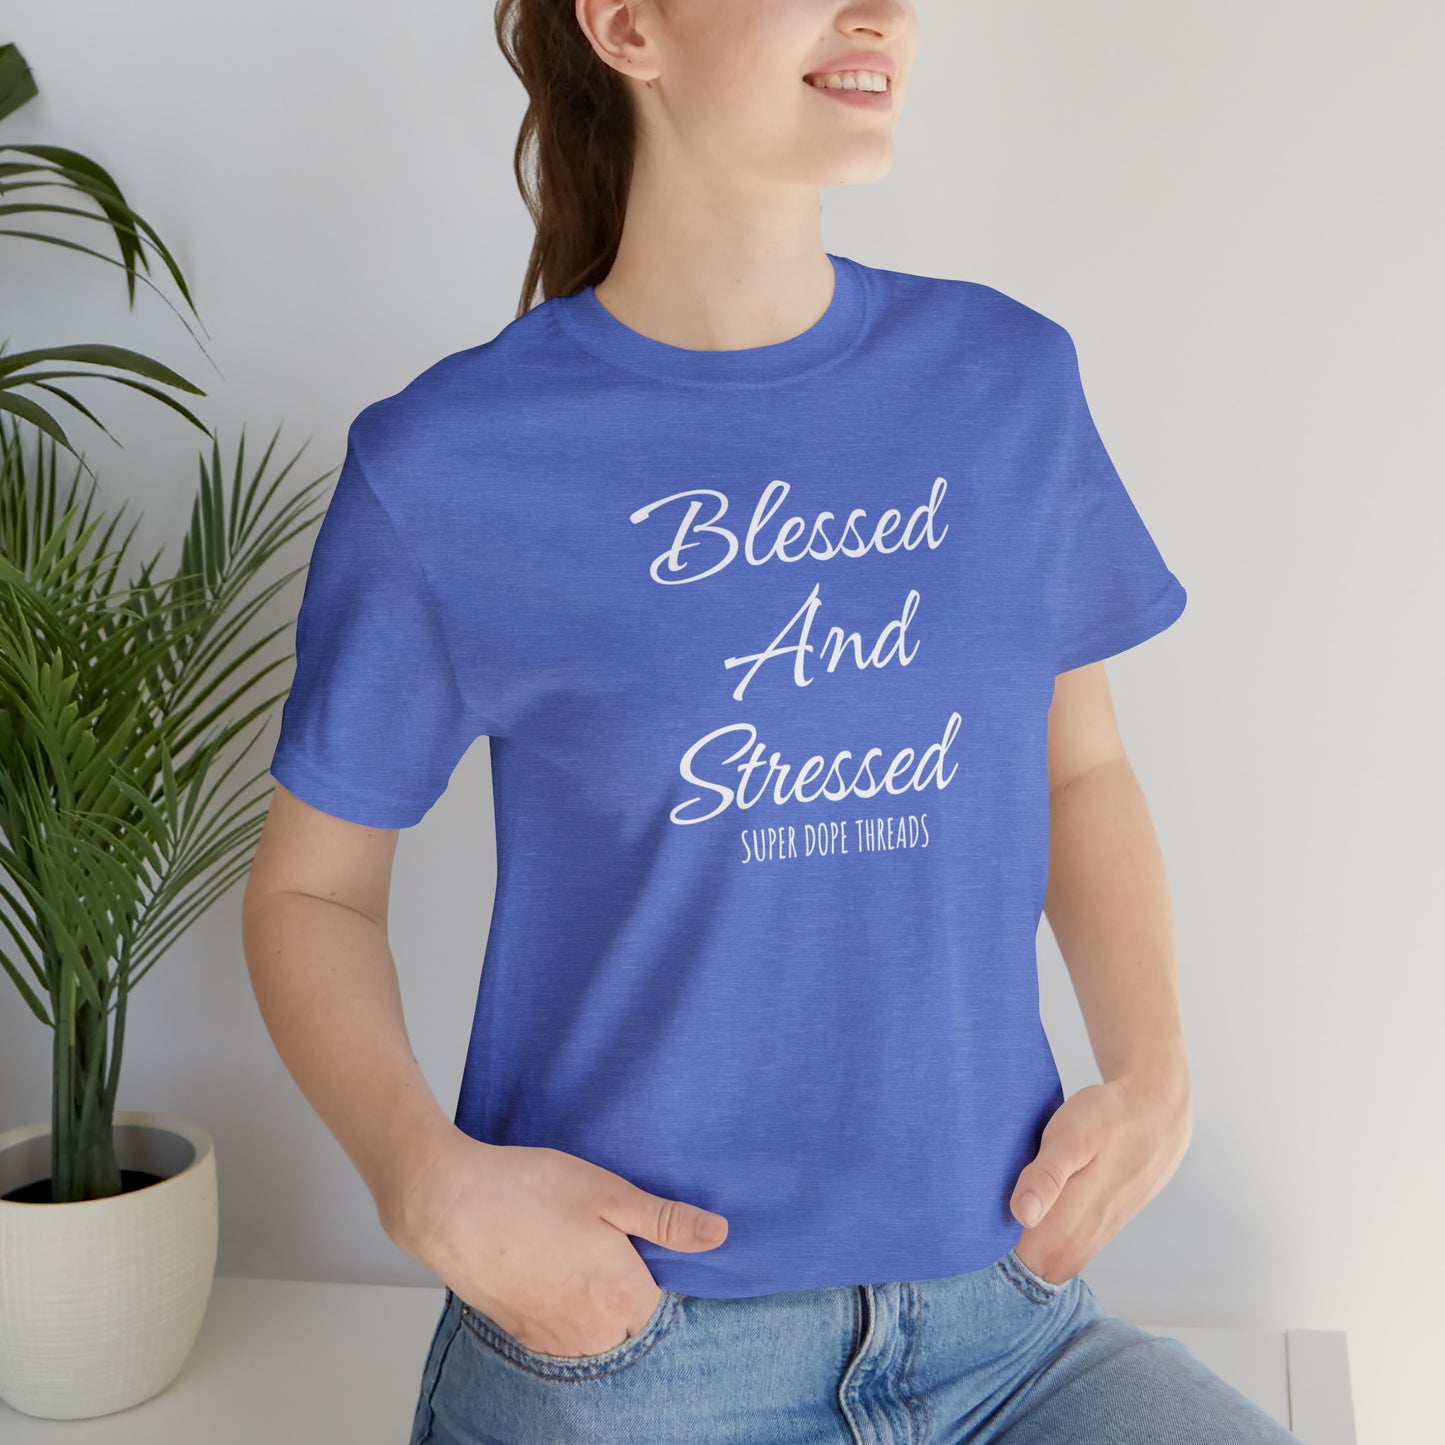 Super Dope Threads - Blessed and Stressed